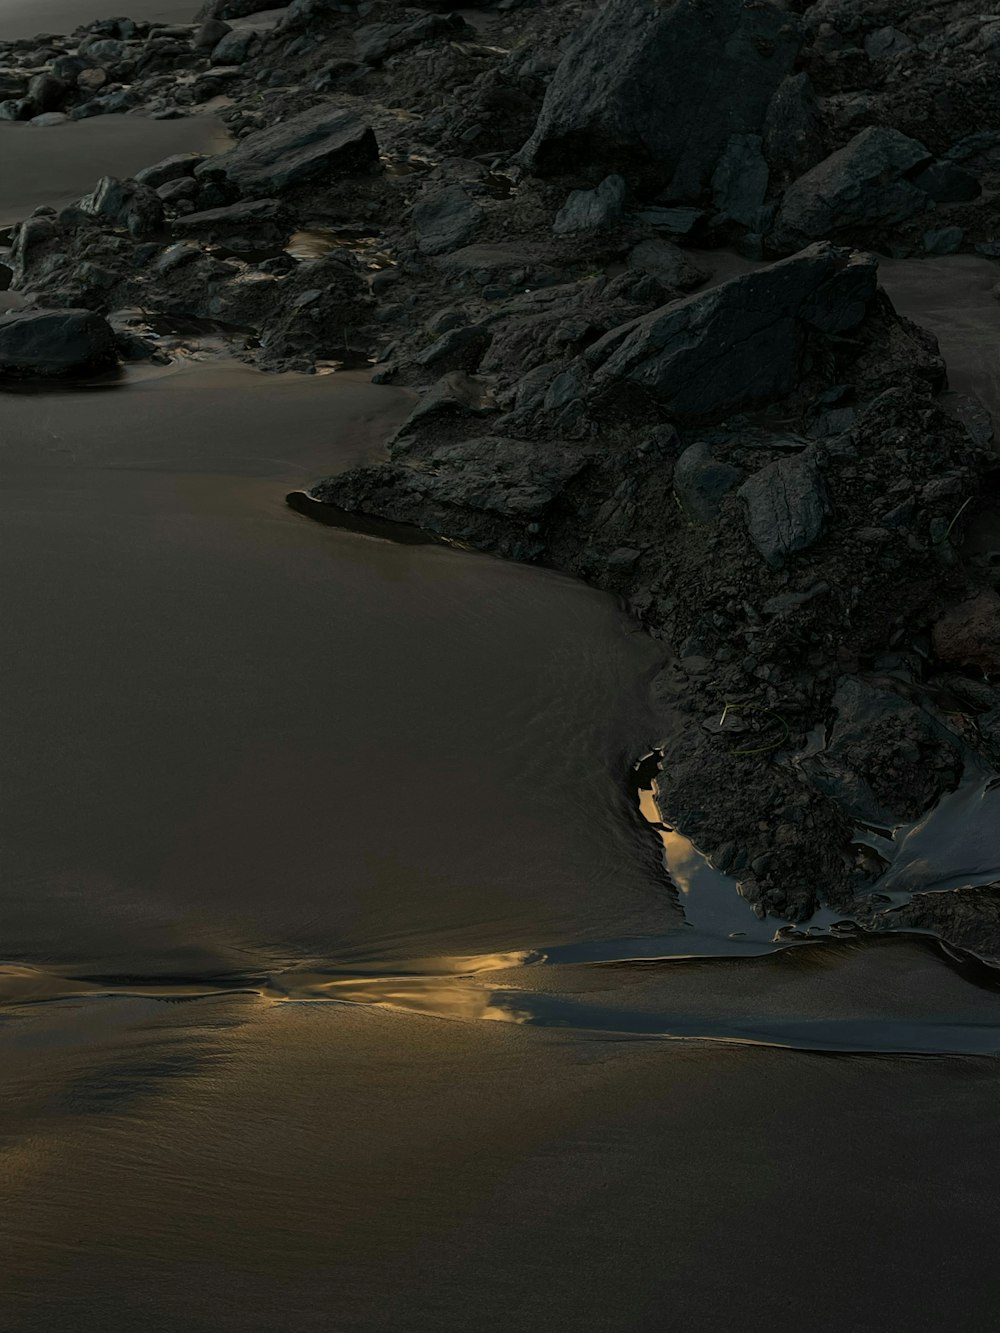 a beach with rocks and water at night